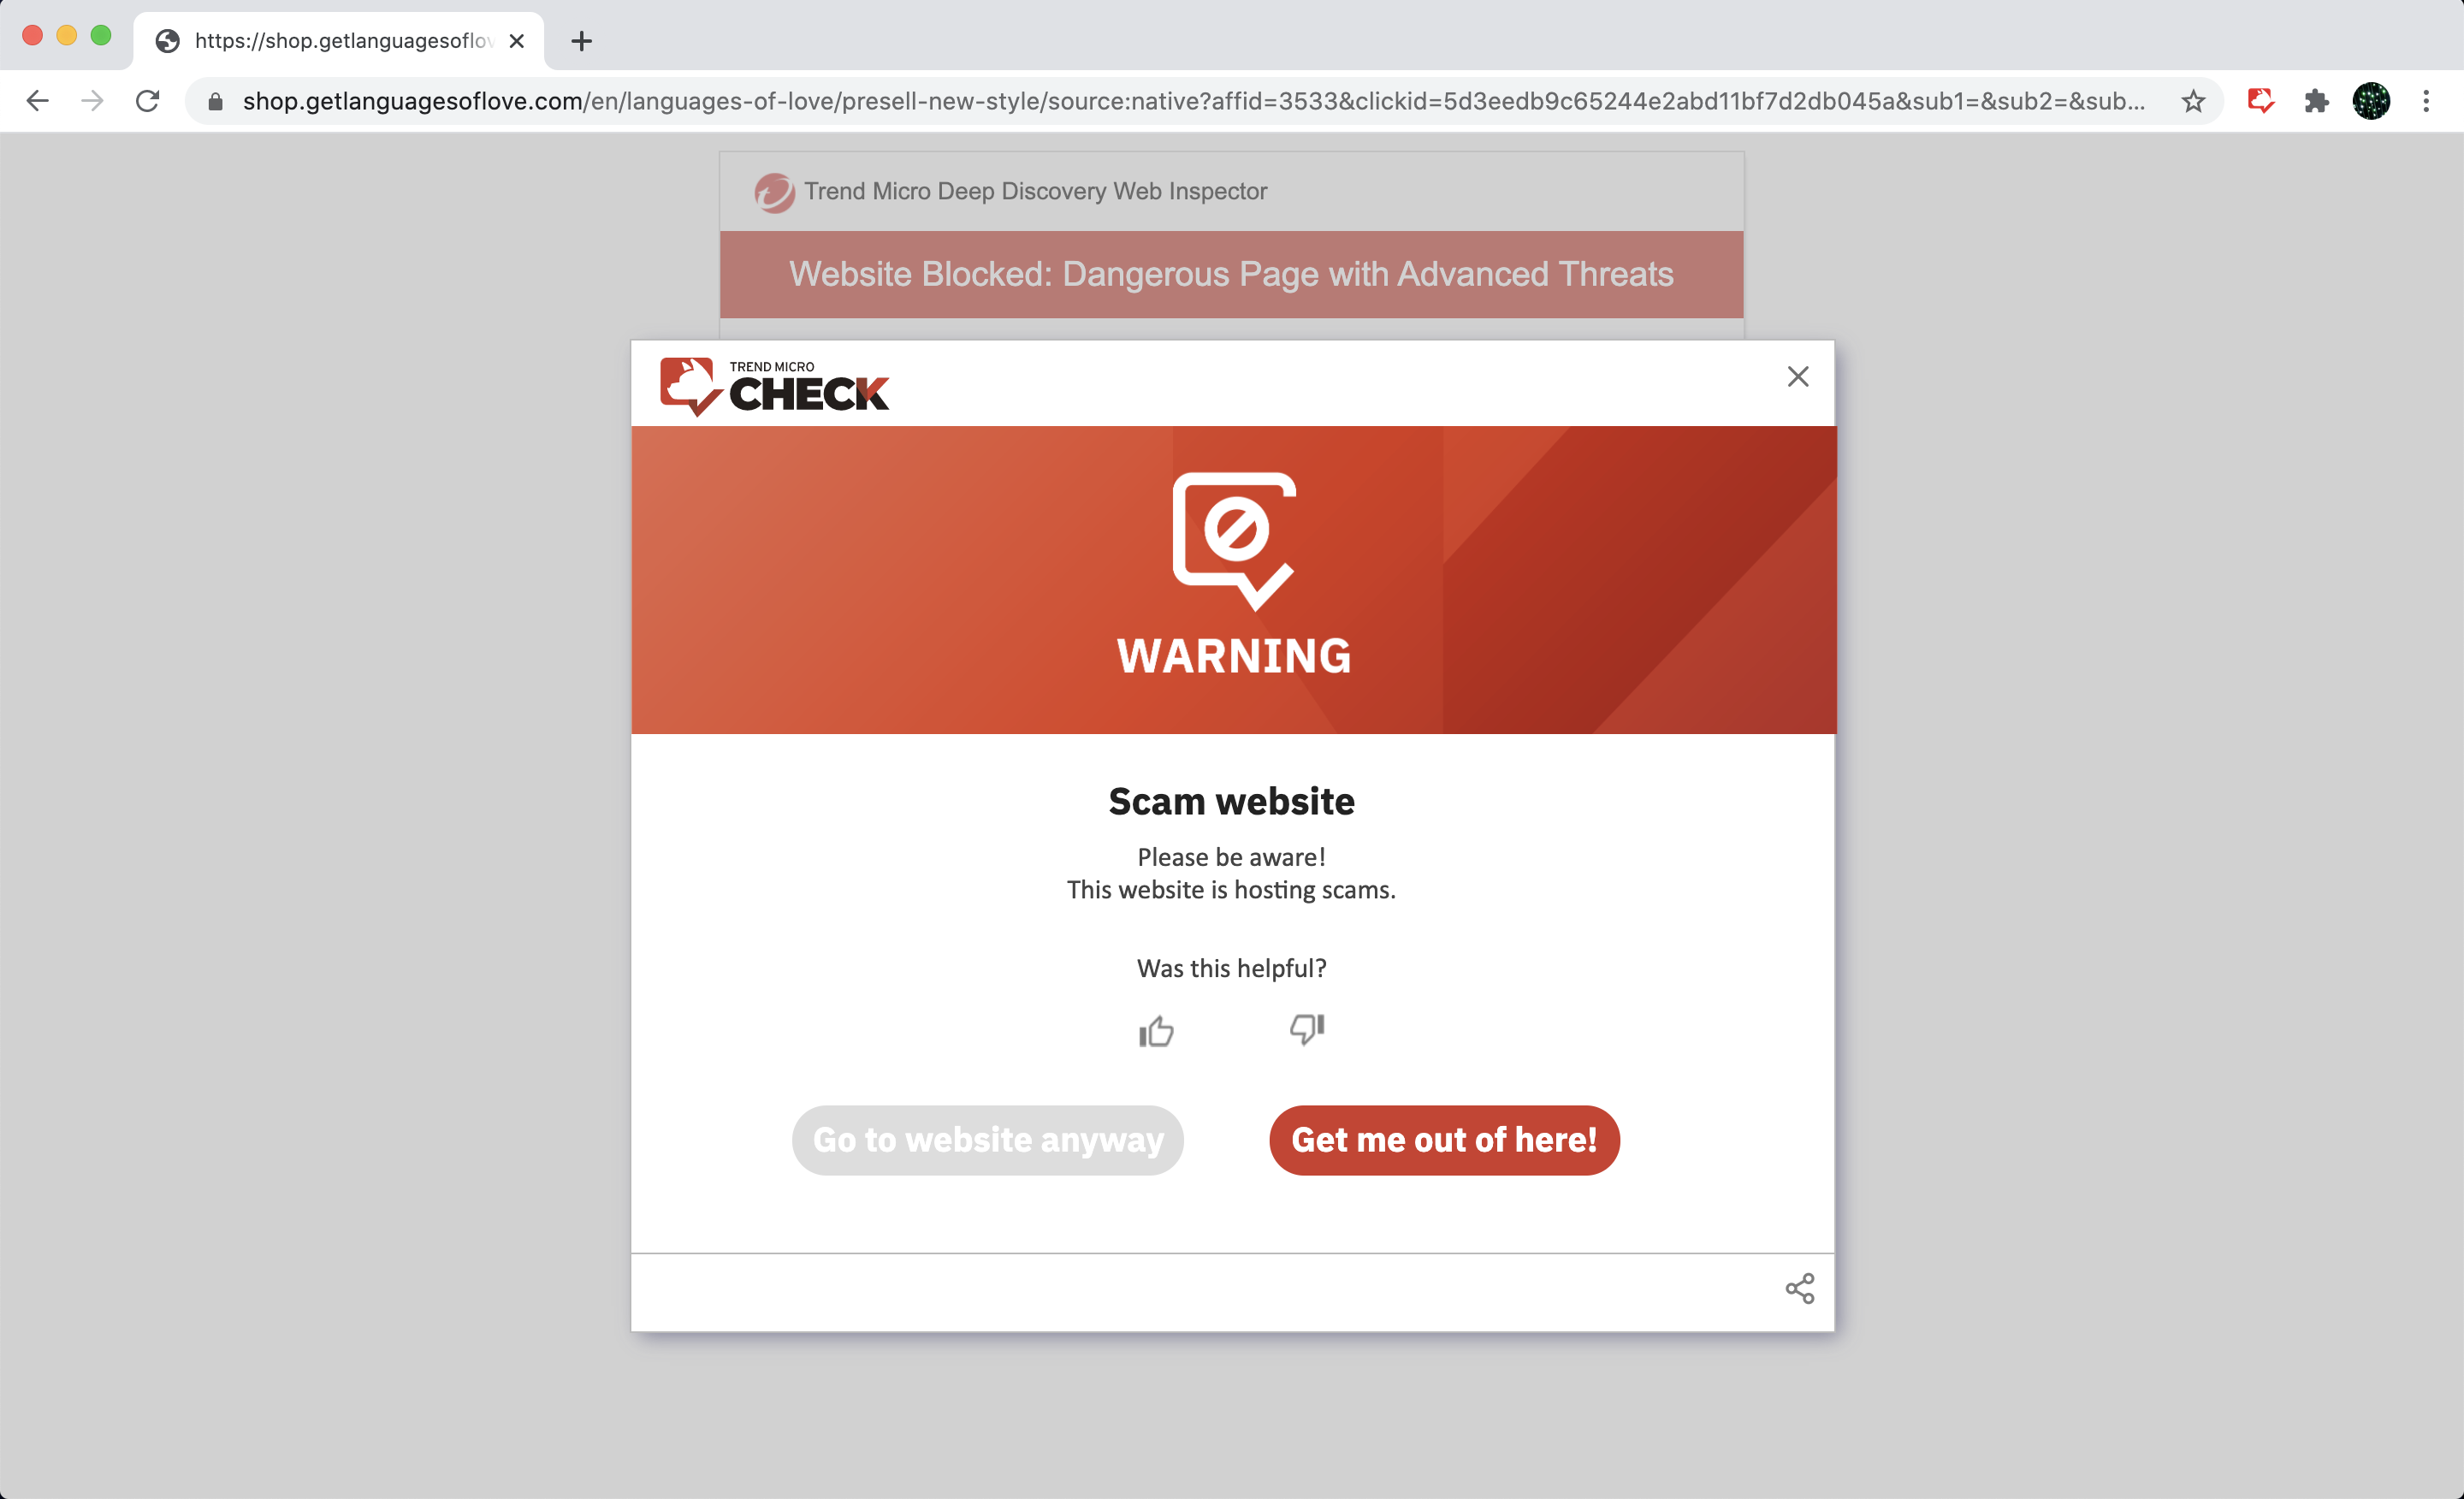 Trend Micro Check Chrome extension version detects the safety status and blocks dangerous pages immediately.